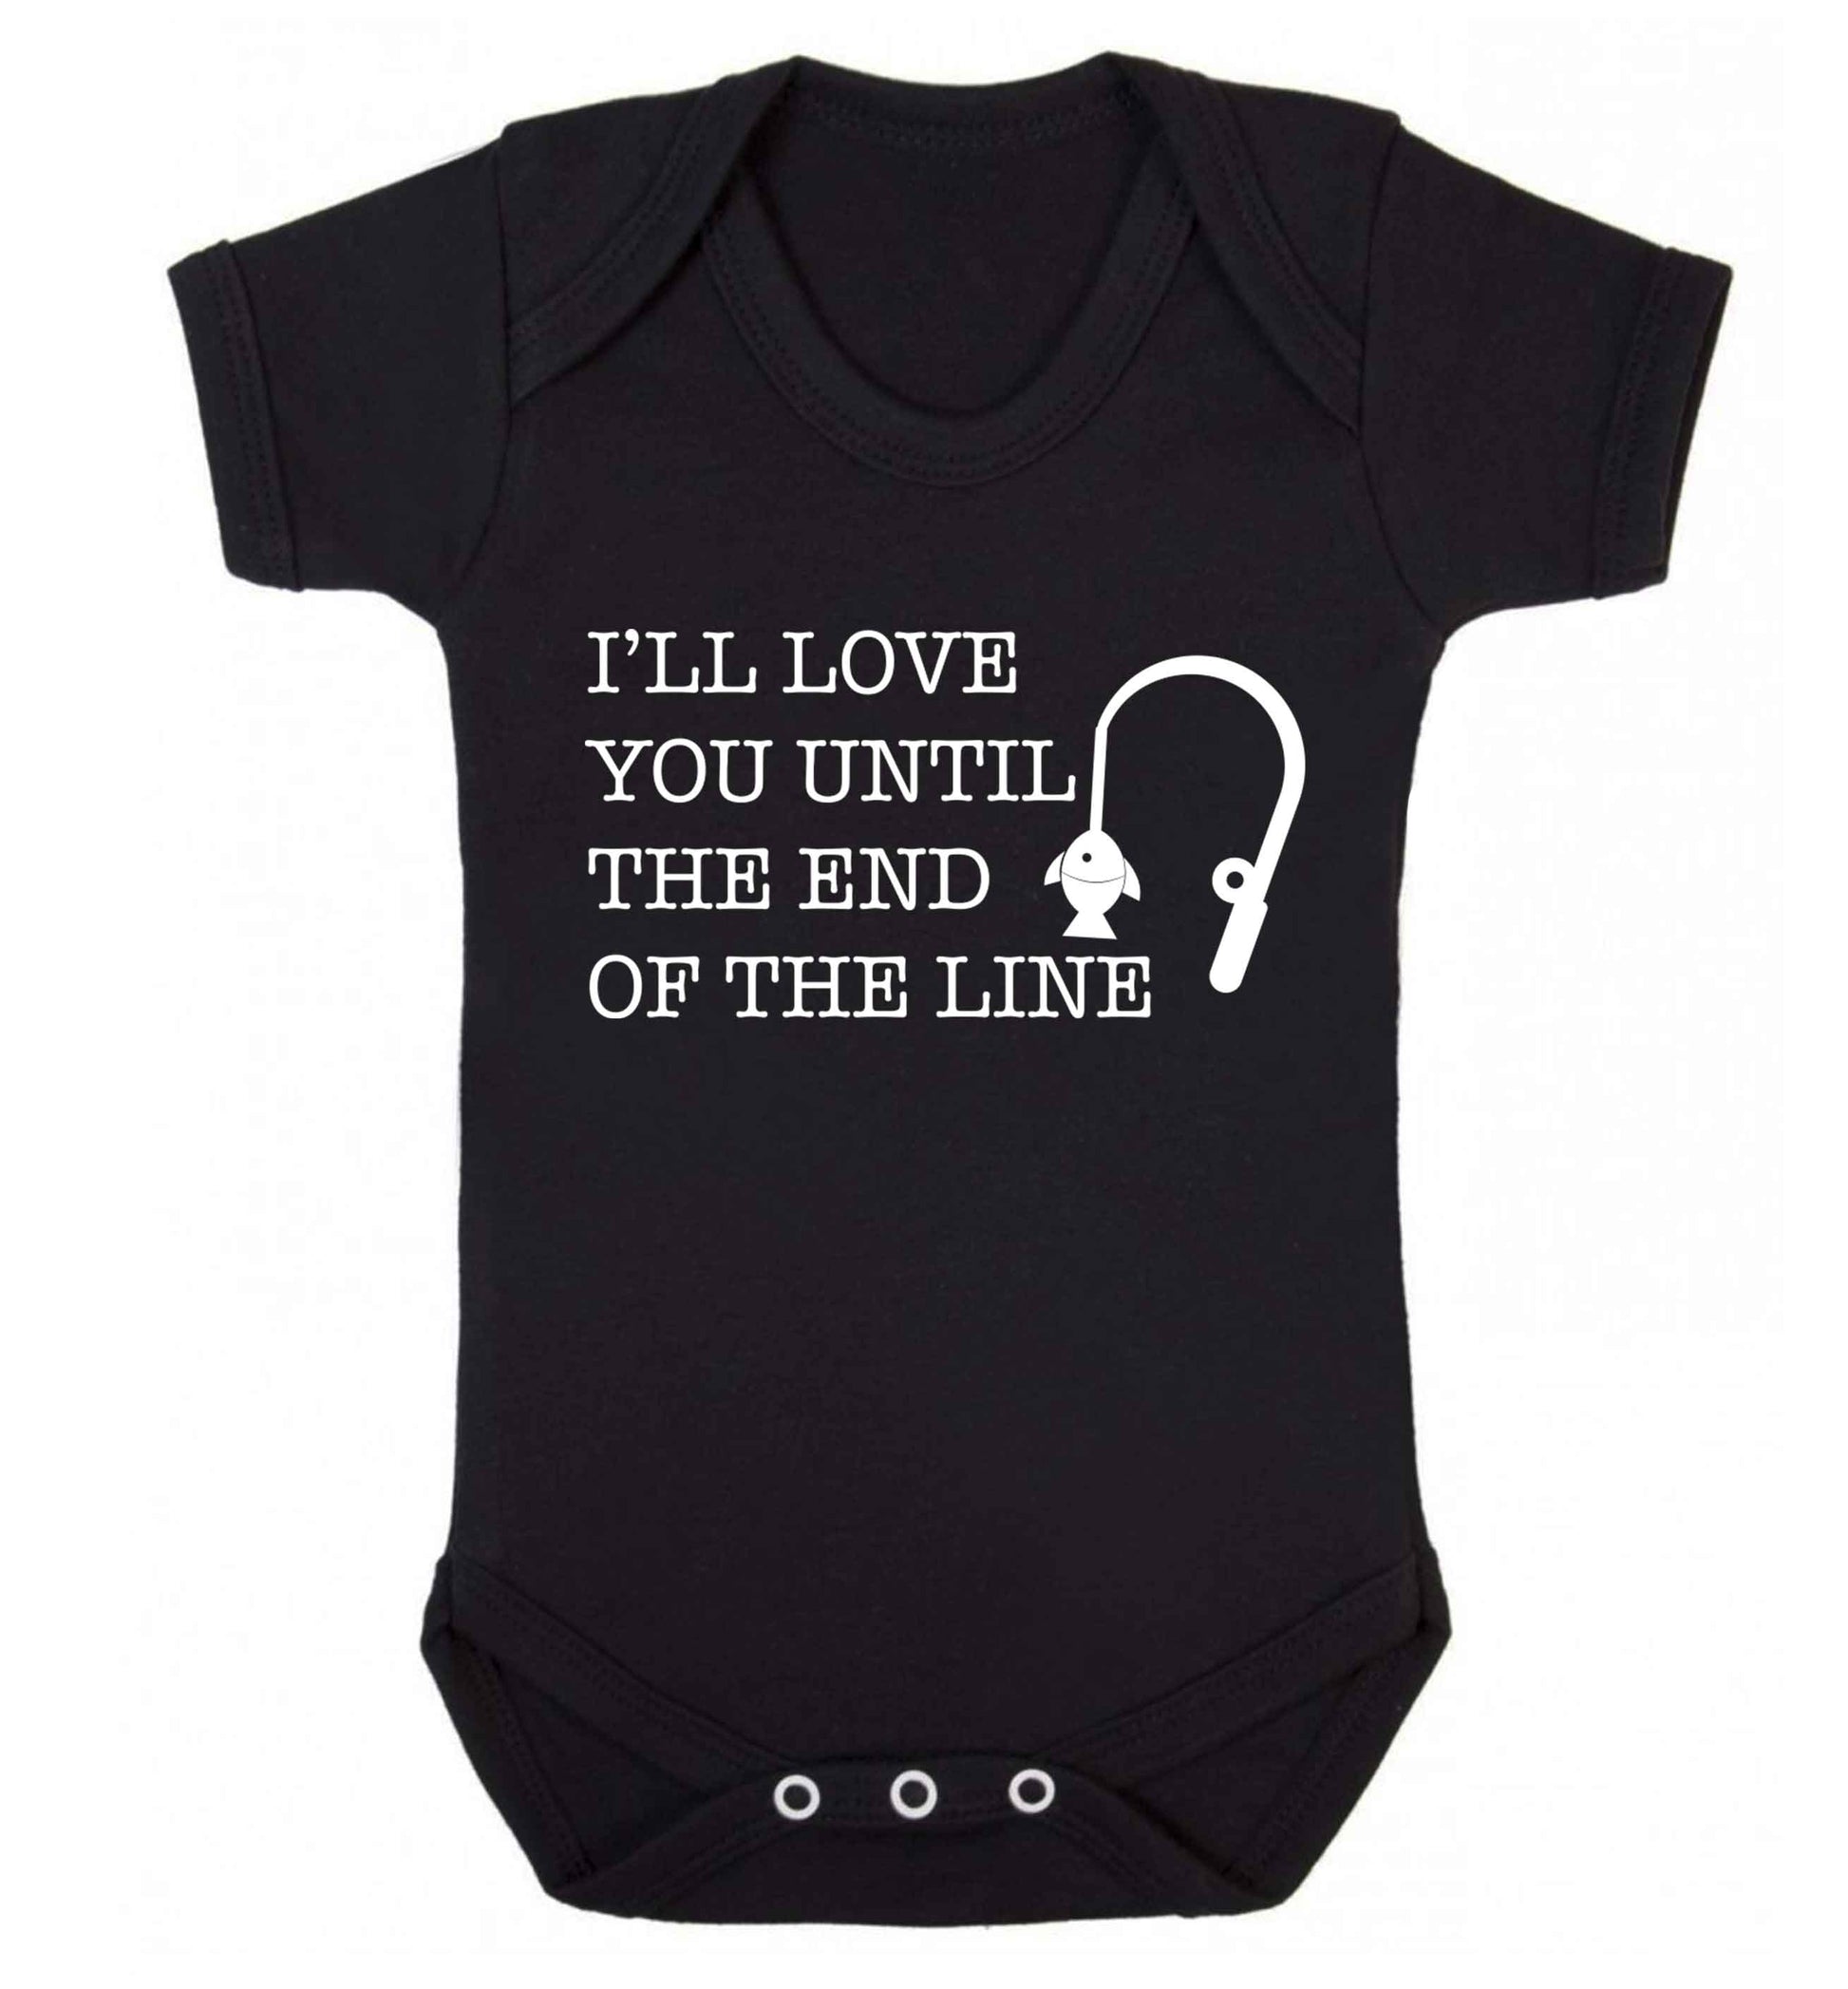 I'll love you until the end of the line Baby Vest black 18-24 months